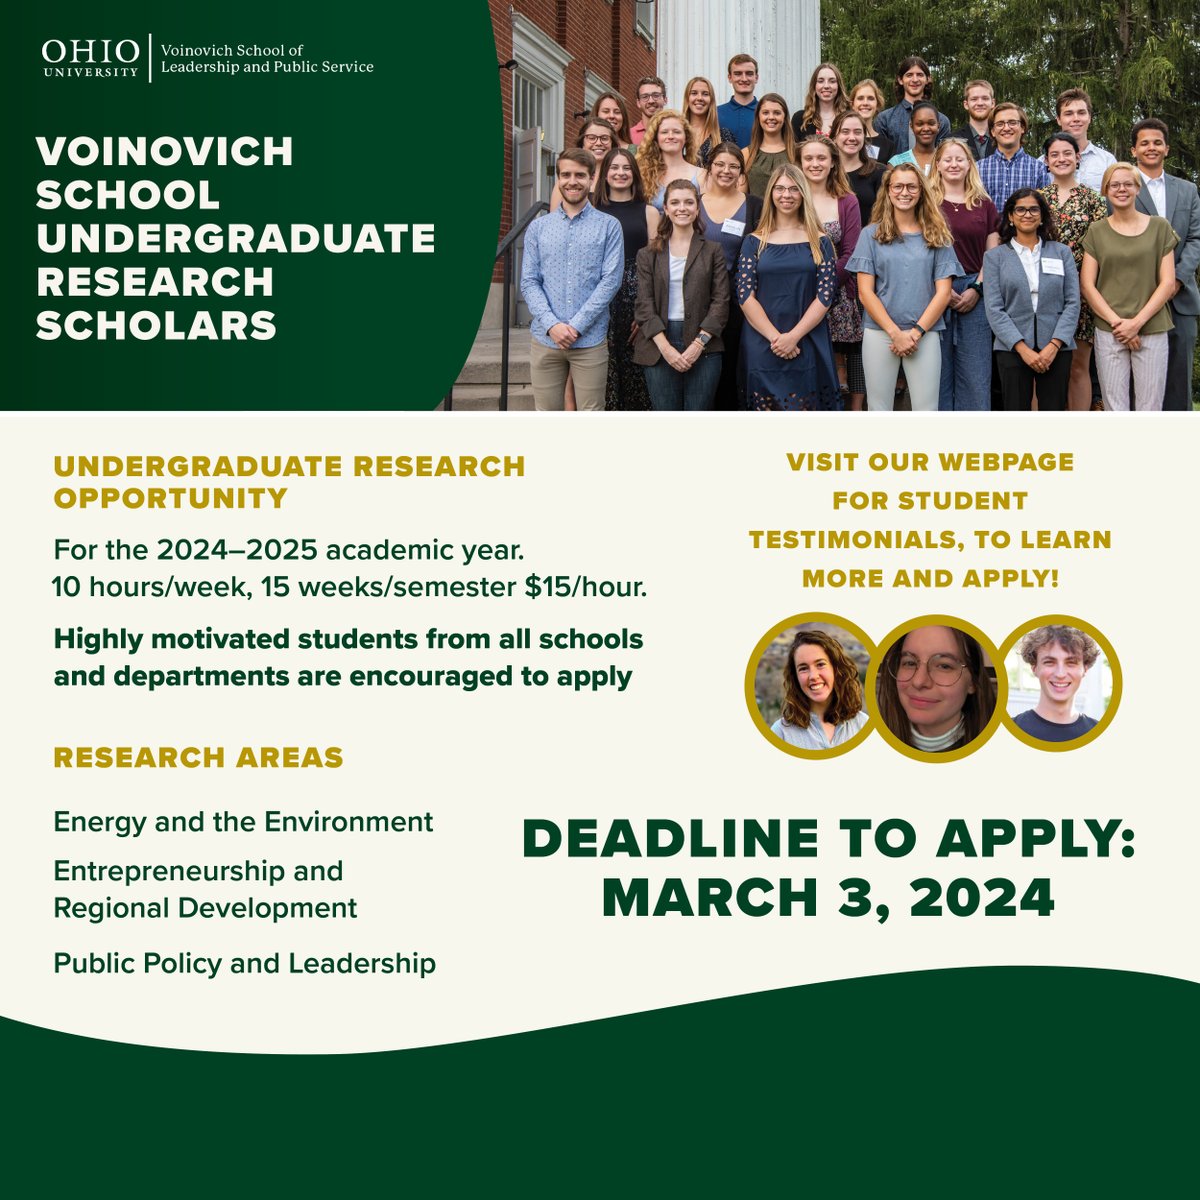 Apply by 3/3 to become a Voinovich Undergraduate Research Scholar for the 2024-2025 academic year! Opportunities include work related to energy & the environment, economic development, and public policy & leadership. @ohiou @ohioES @OUHTC Learn more: bit.ly/3UireEL